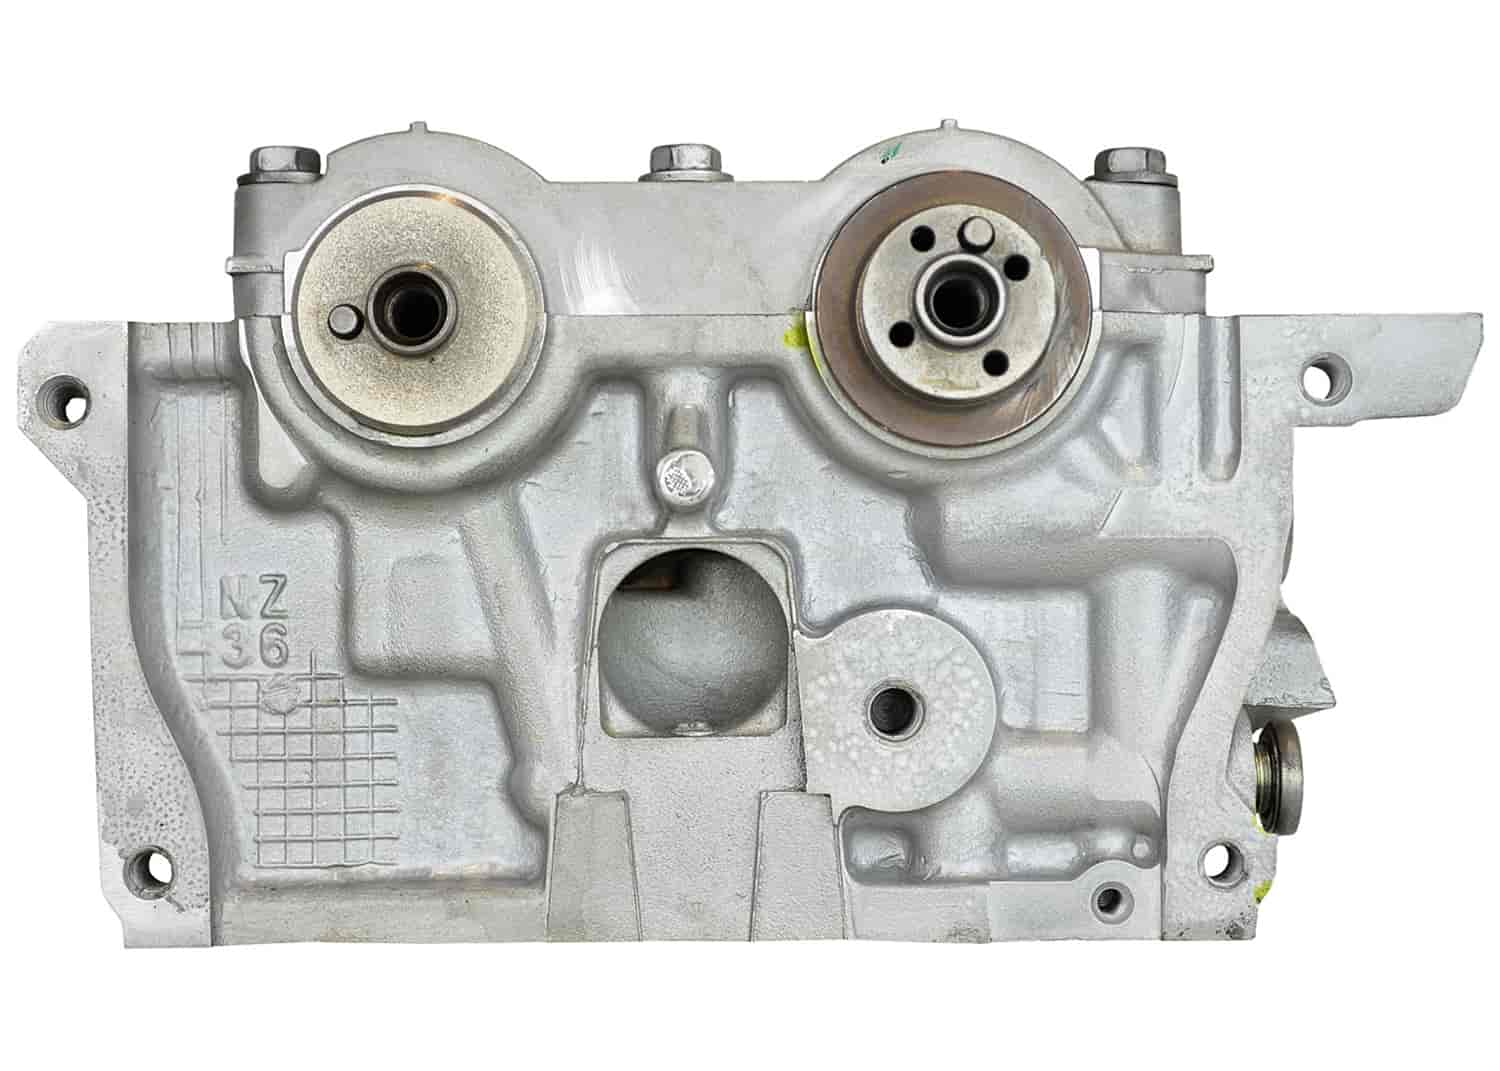 Remanufactured Cylinder Head for 2000-2015 Toyota/Scion with 1.5L L4 1NZFE